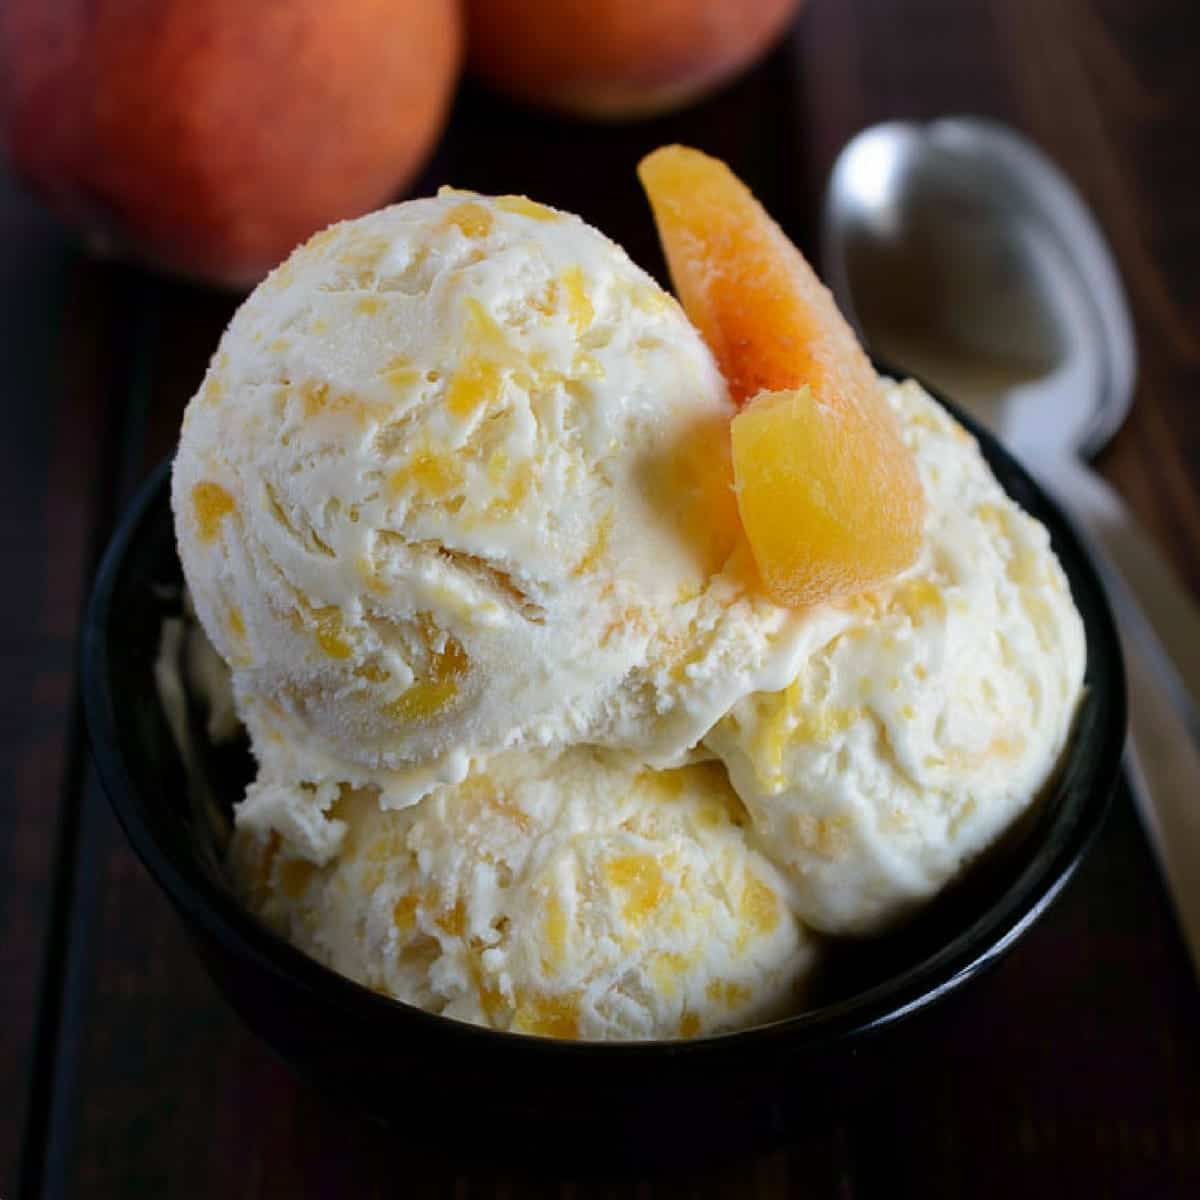 Angled view of peaches and cream ice cream in a black bowl with a sliced peach on top.